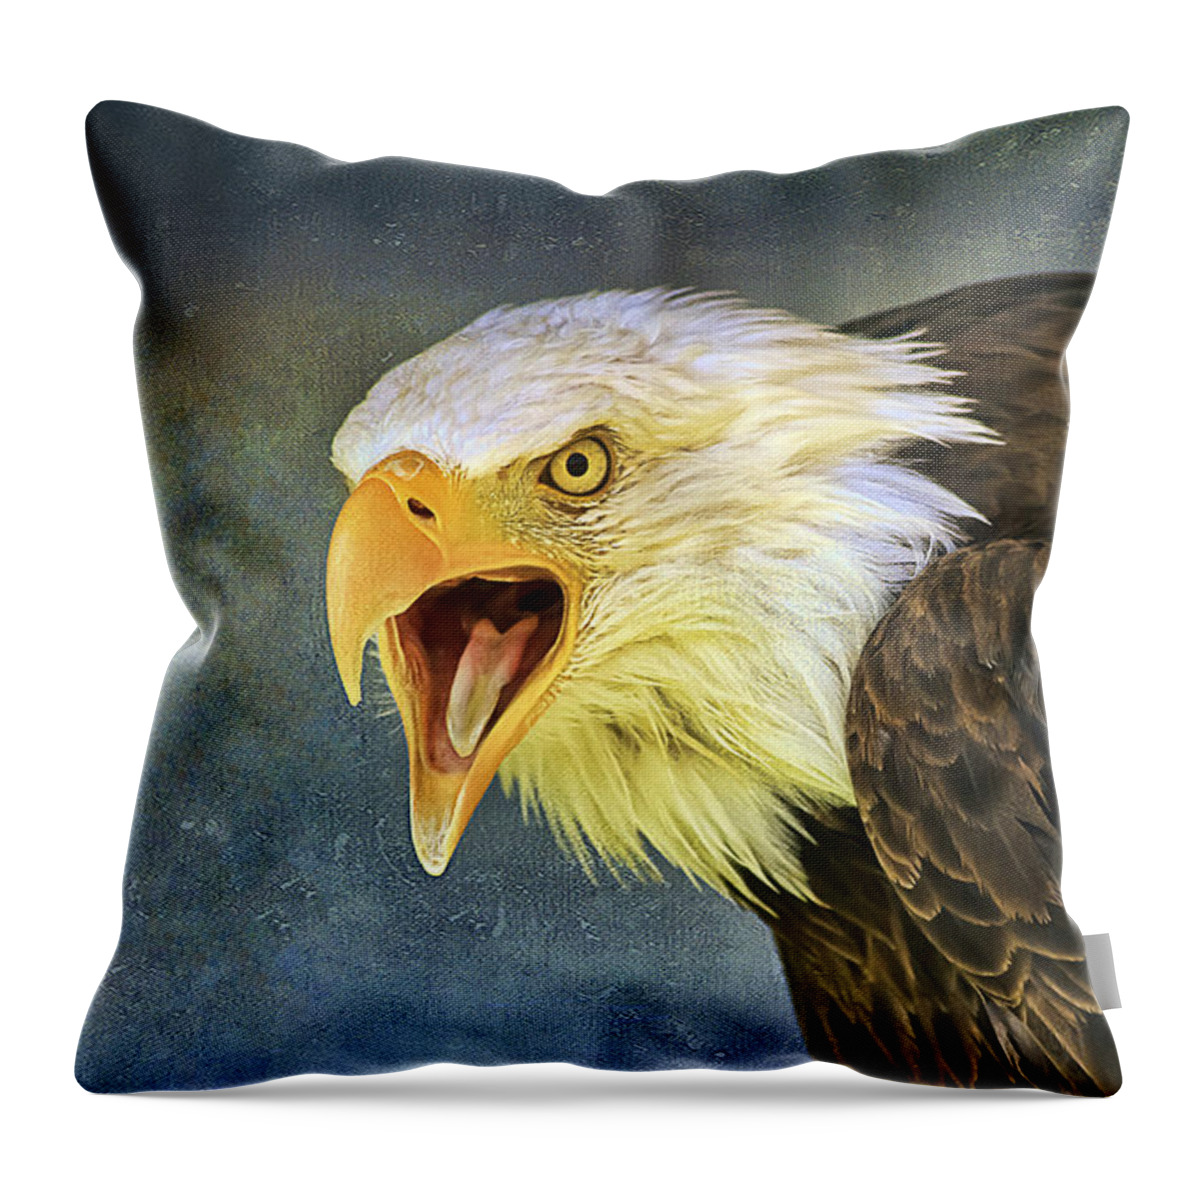 Bird Throw Pillow featuring the photograph Do It Or Else by Teresa Zieba